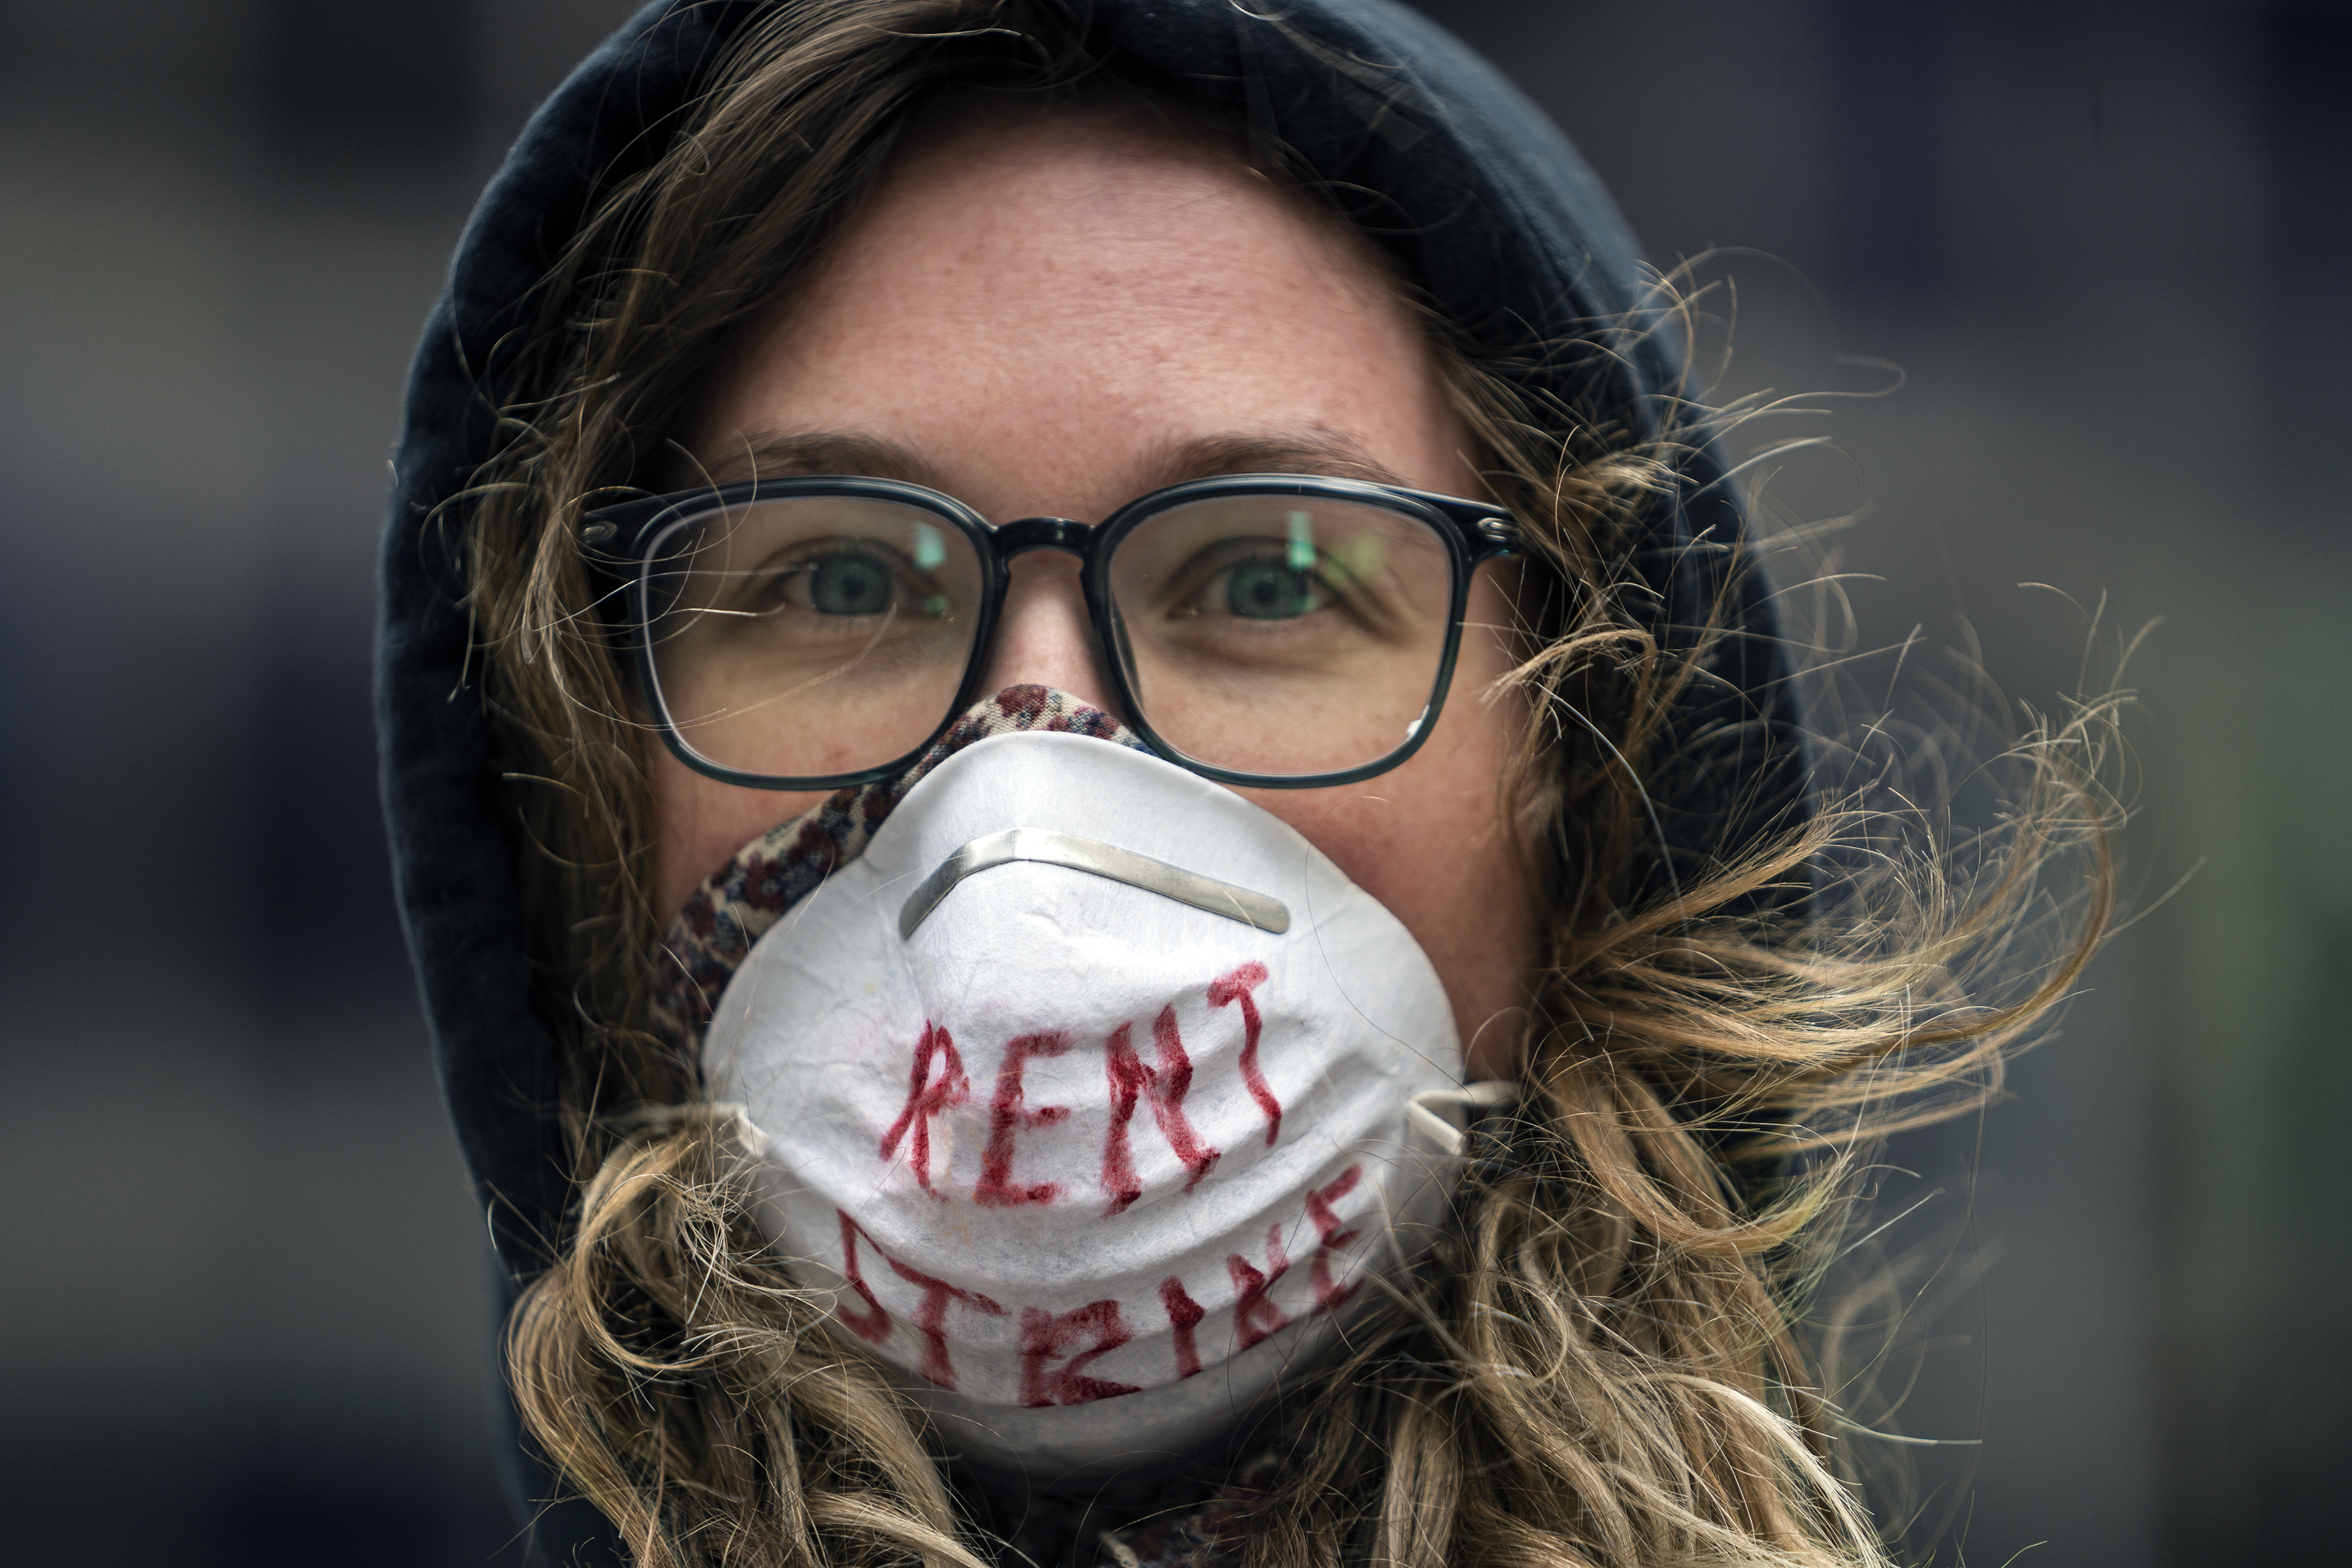 Karissa Stotts takes part in a protest calling for relief for renters and homeowners in Minneapolis, Minn., on April 8, 2020. (Richard Tsong-Taatarii—Star Tribune/Getty Images)